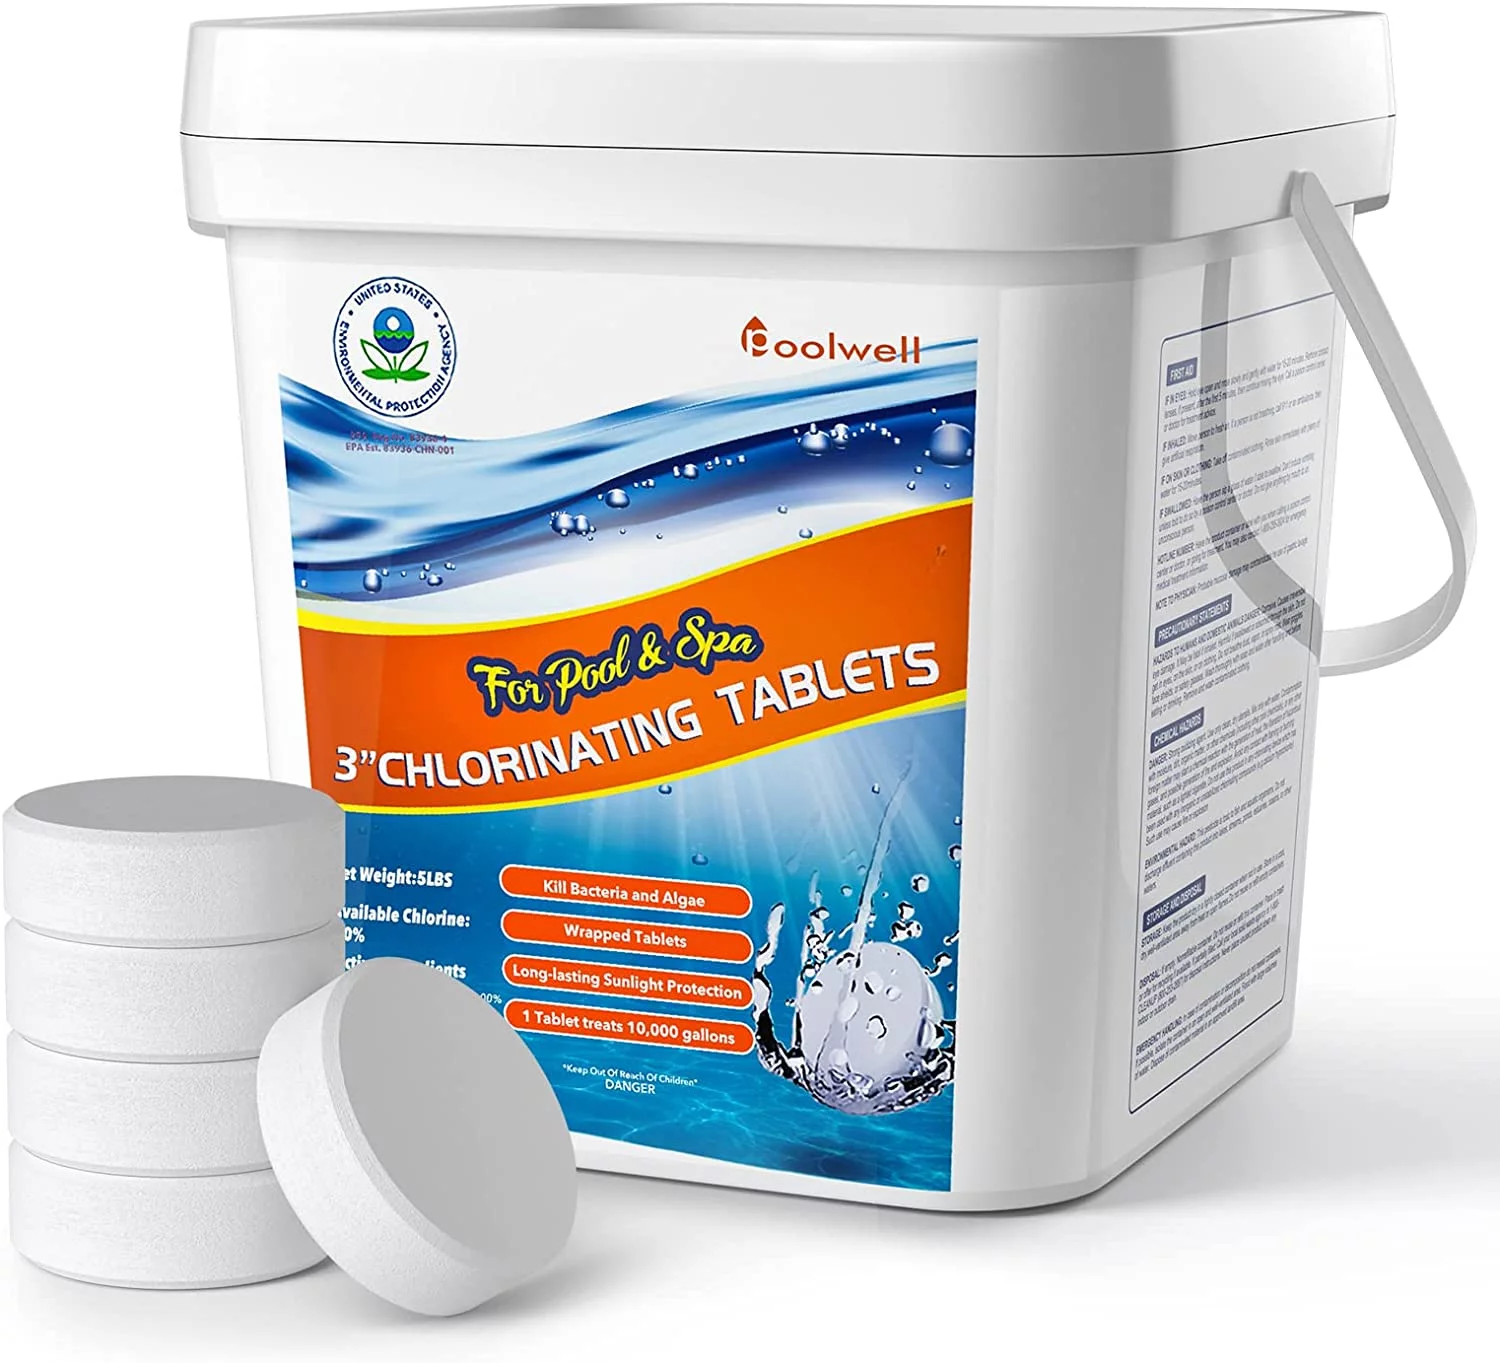 PoolWell Pool & Spa Chlorine Tablets 3 inch for Swimming Pools-5LB